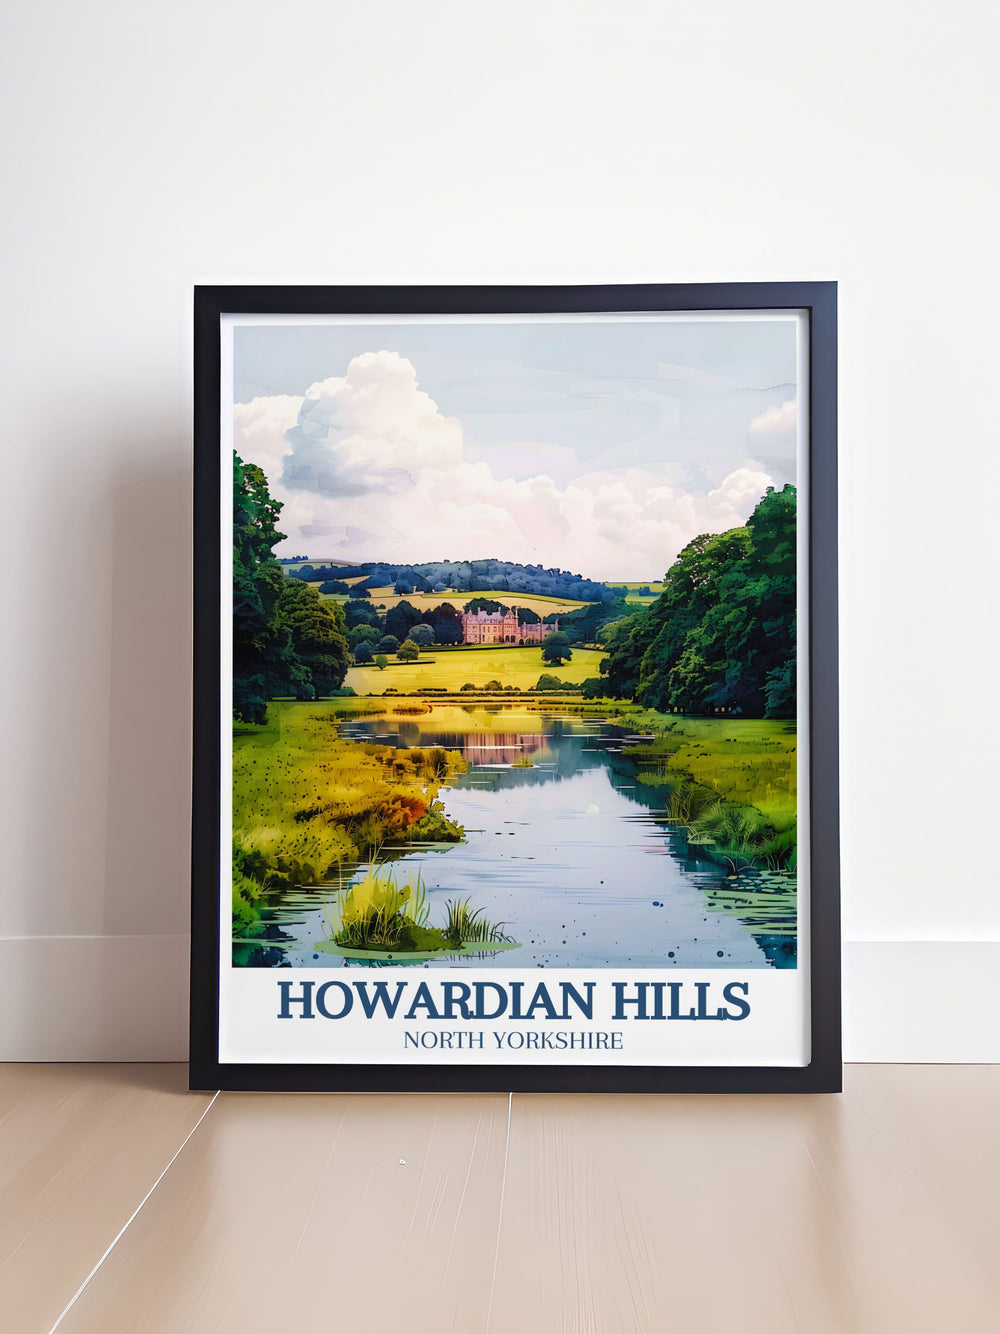 Home decor featuring Castle Howard, showcasing its majestic architecture and expansive gardens. This print is ideal for those who appreciate historical grandeur and want to bring a touch of English elegance into their living space.